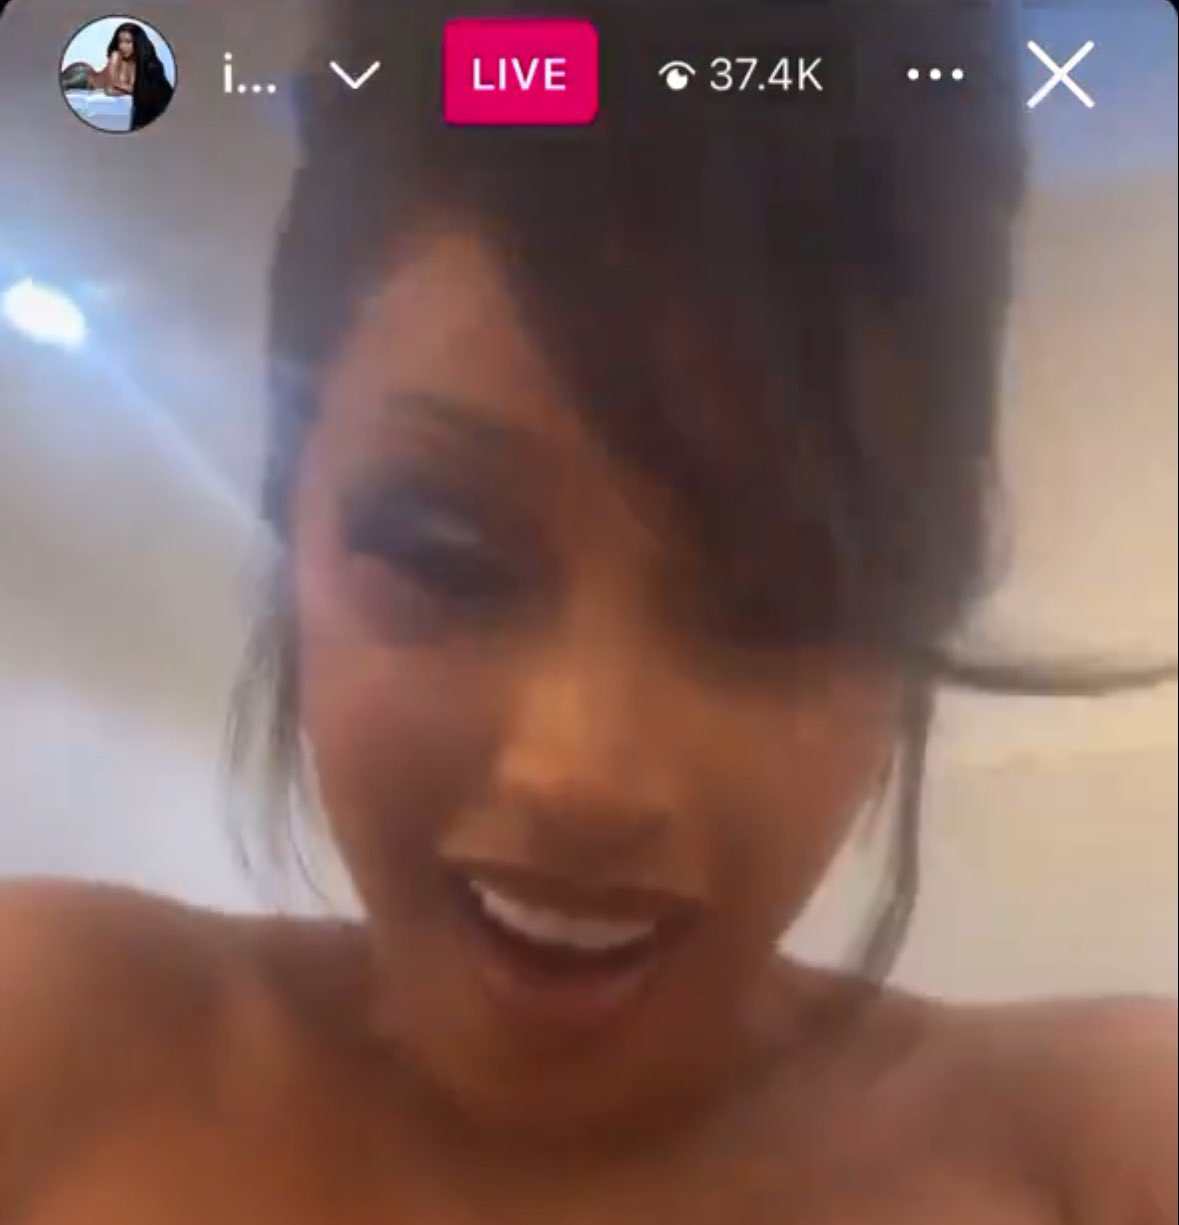 VIDEO Cardi B shaking her boobs on Instagram Live in